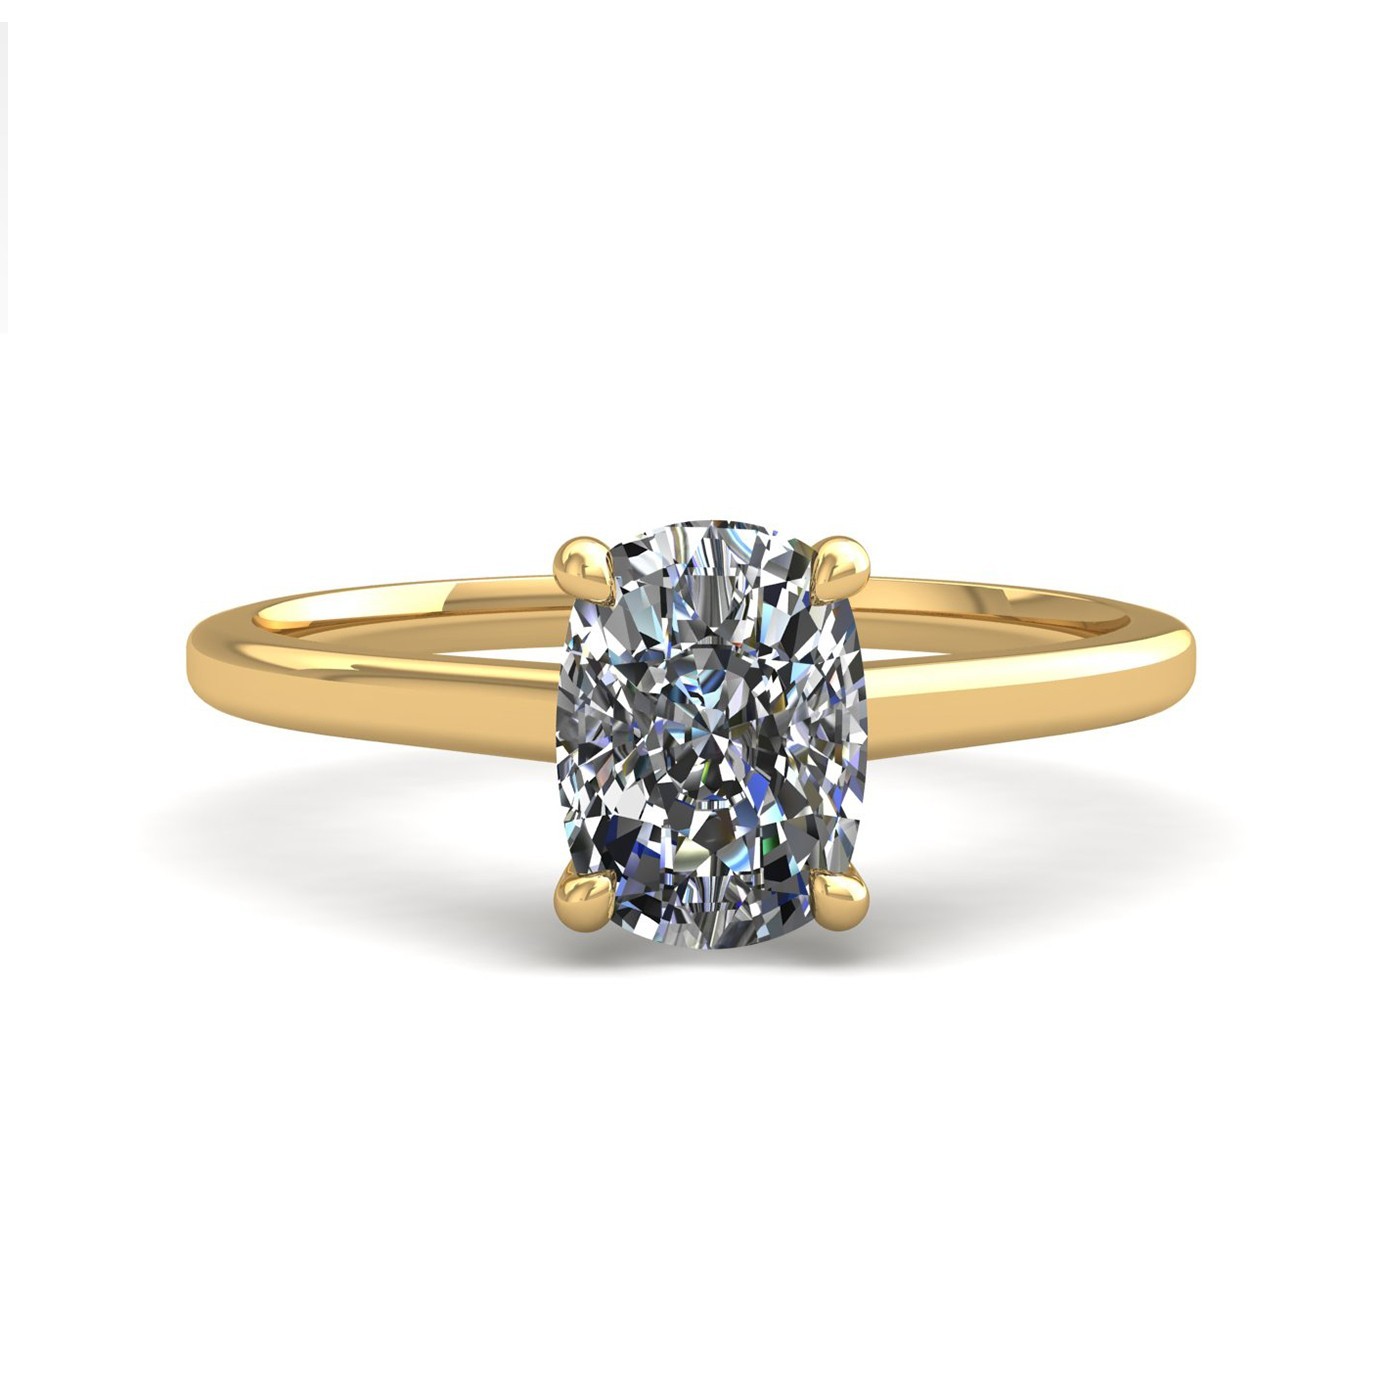 18k yellow gold  0,50 ct 4 prongs solitaire elongated cushion cut diamond engagement ring with whisper thin band Photos & images